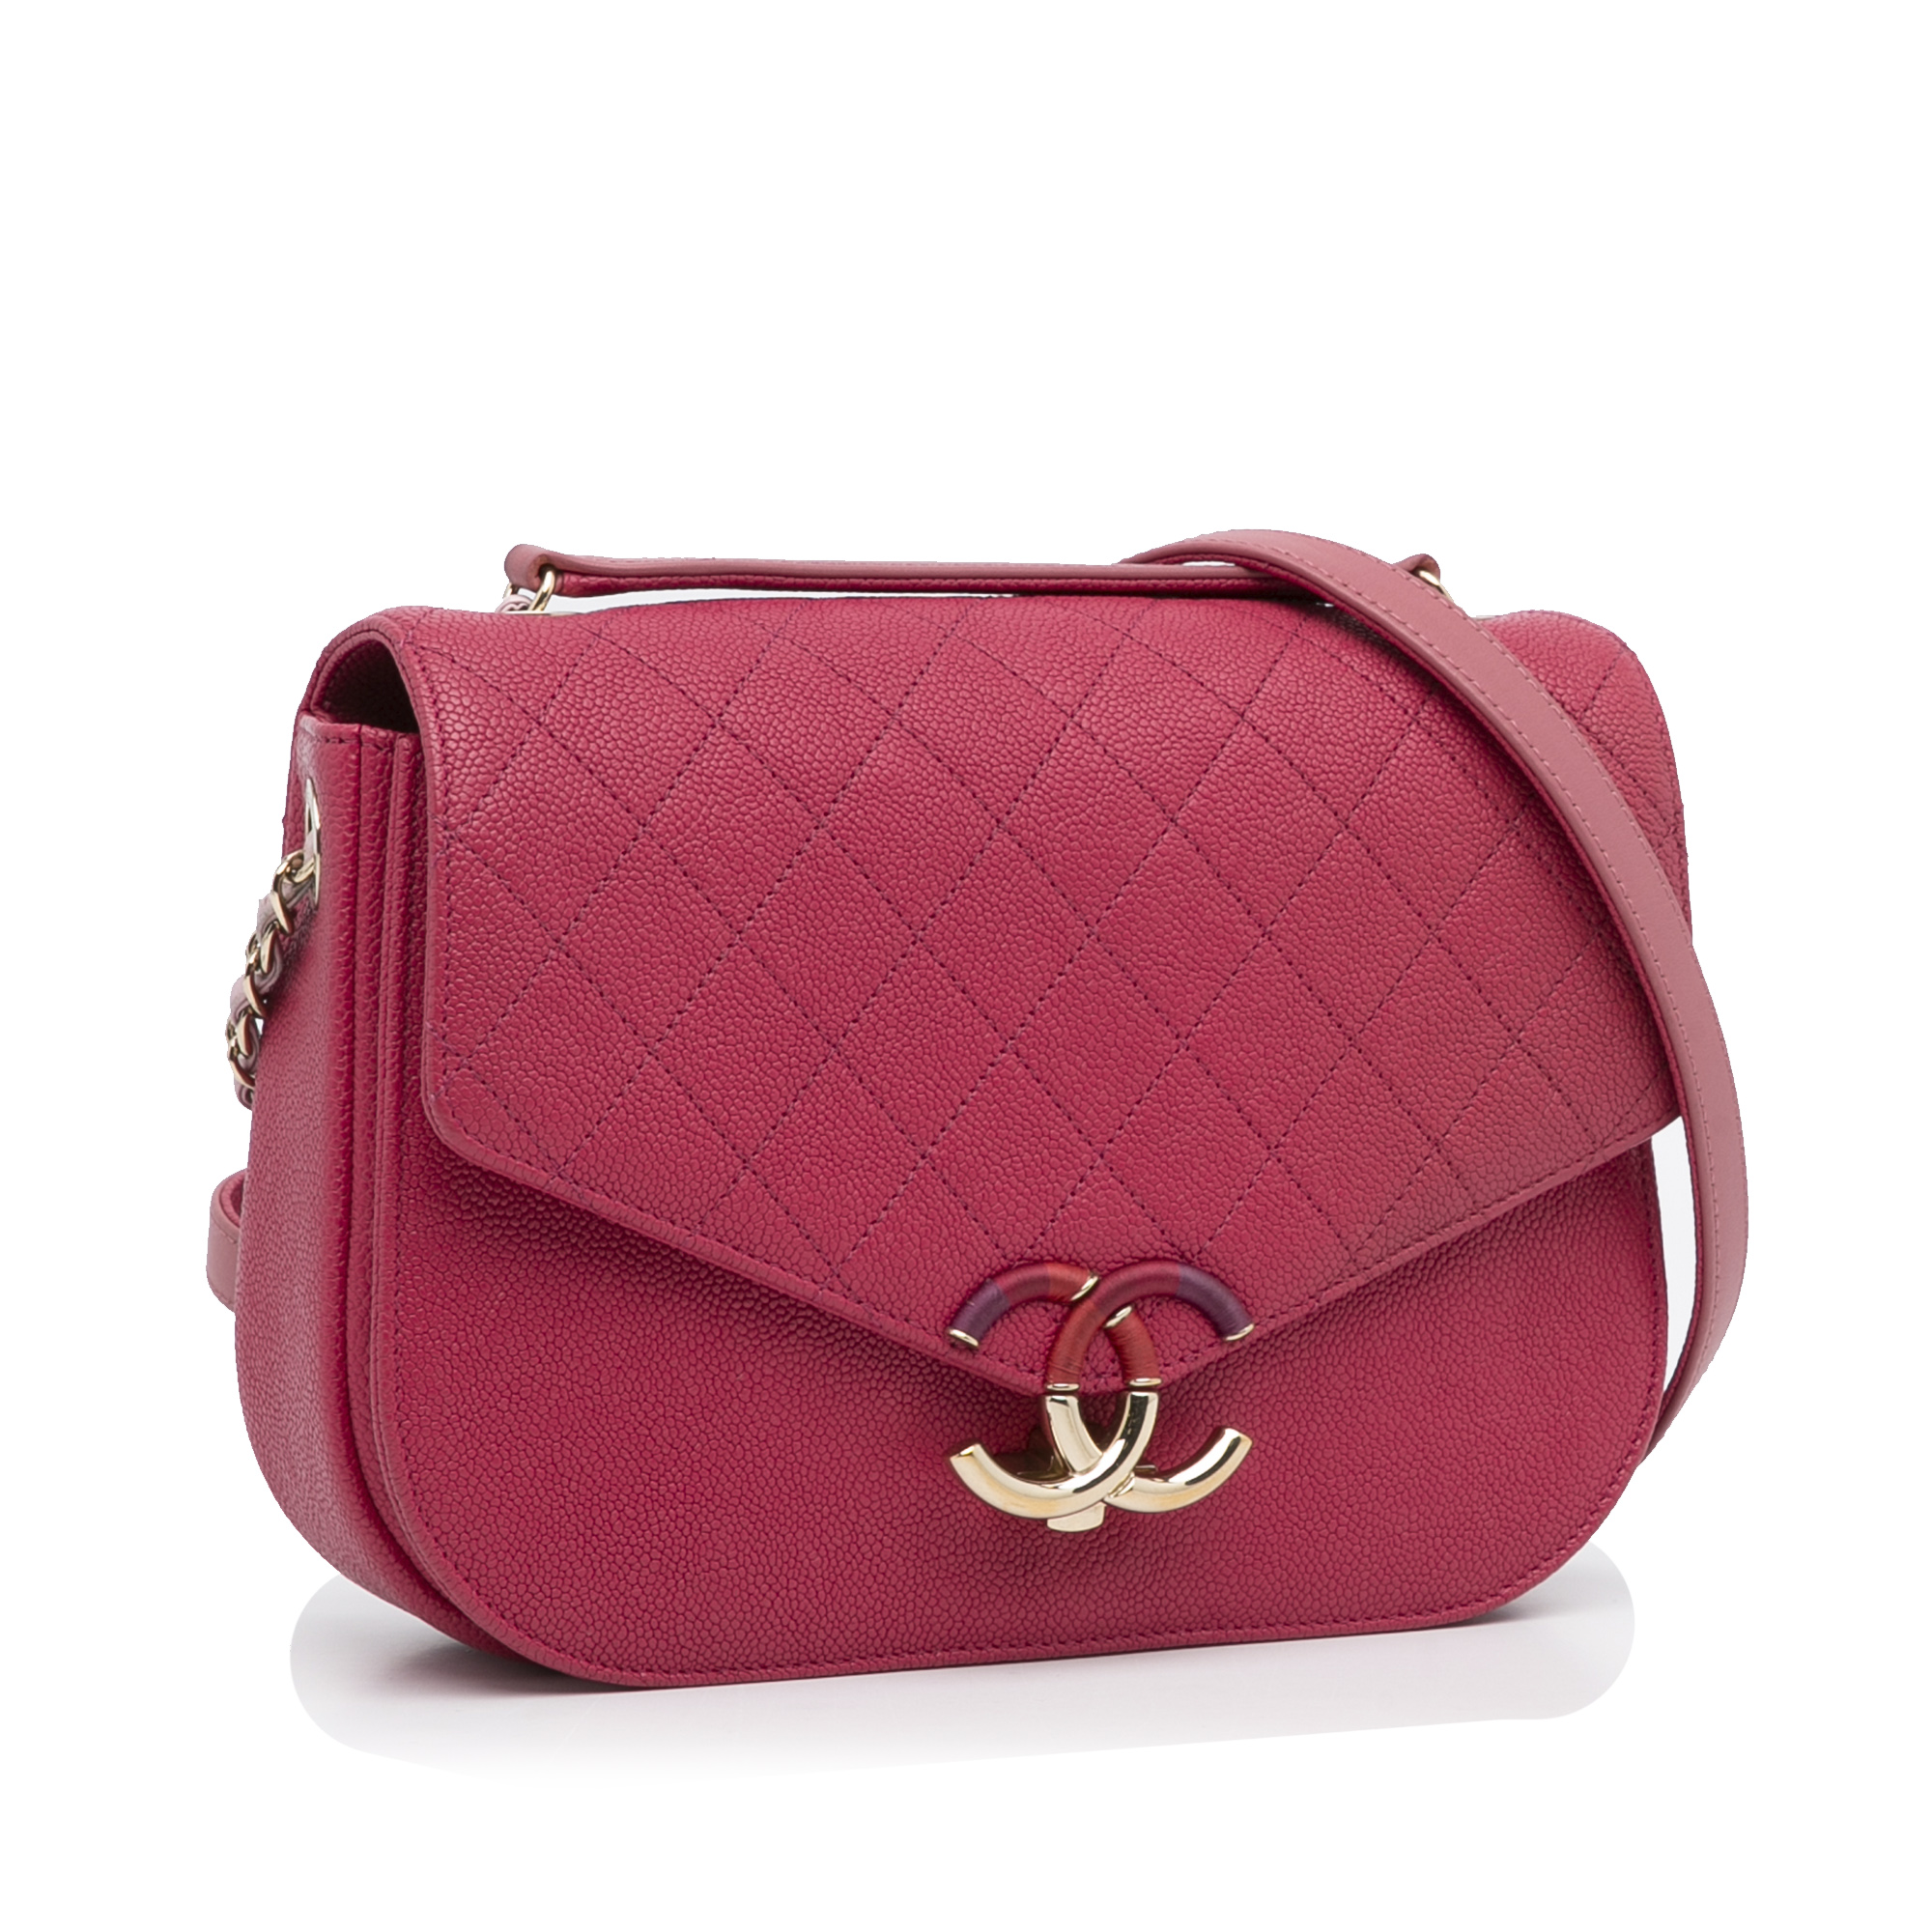 Quilted Leather Satchel with Metal Closure